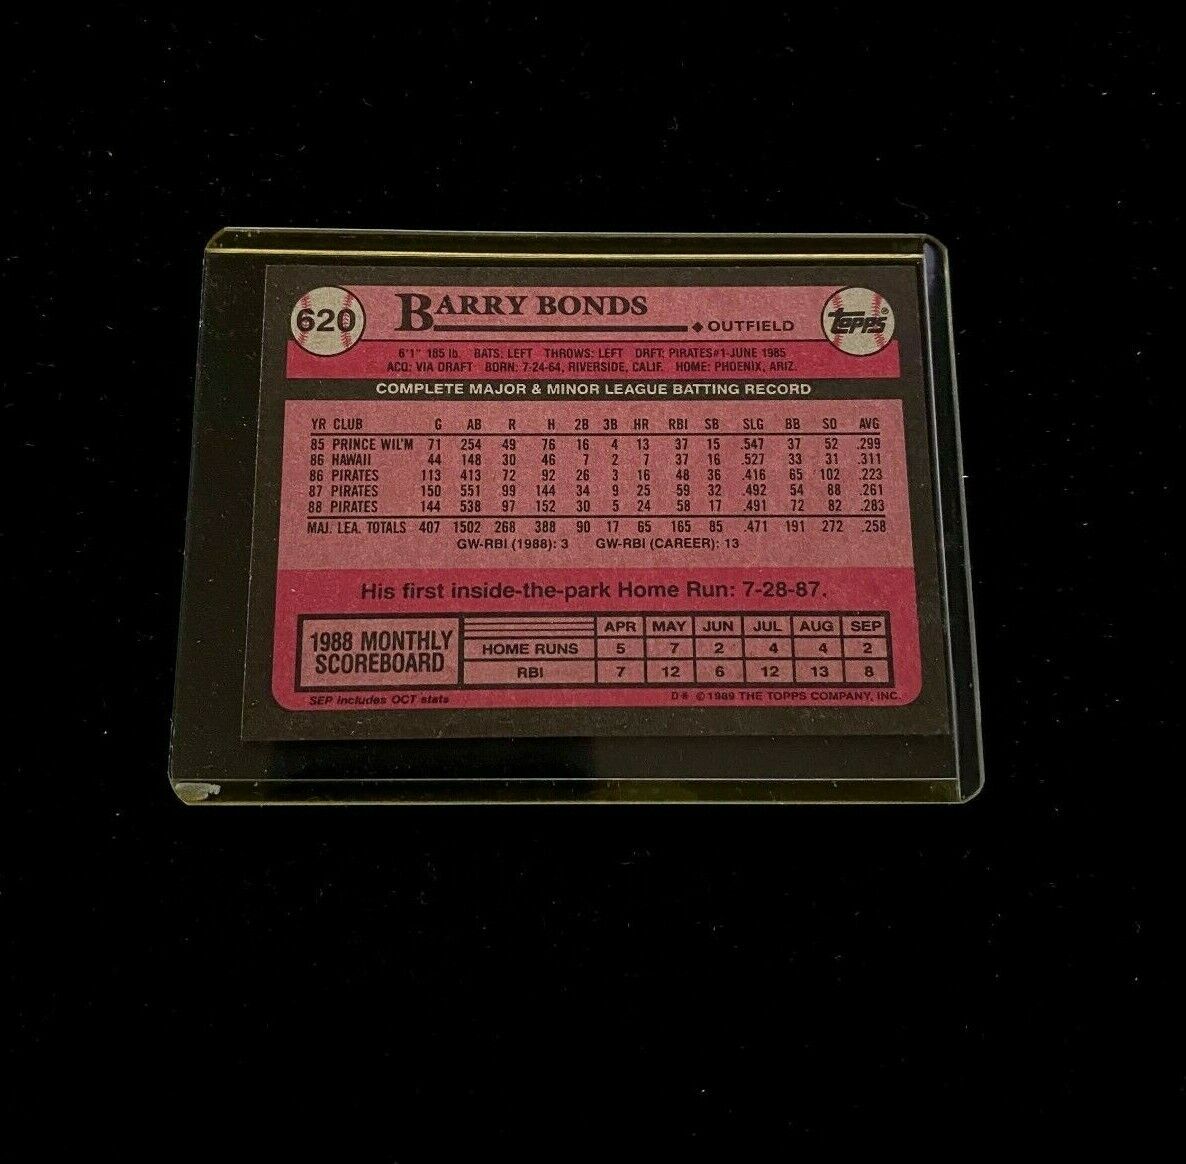 1989 Topps Barry Bonds Baseball Card! (GREAT CONDITION!)